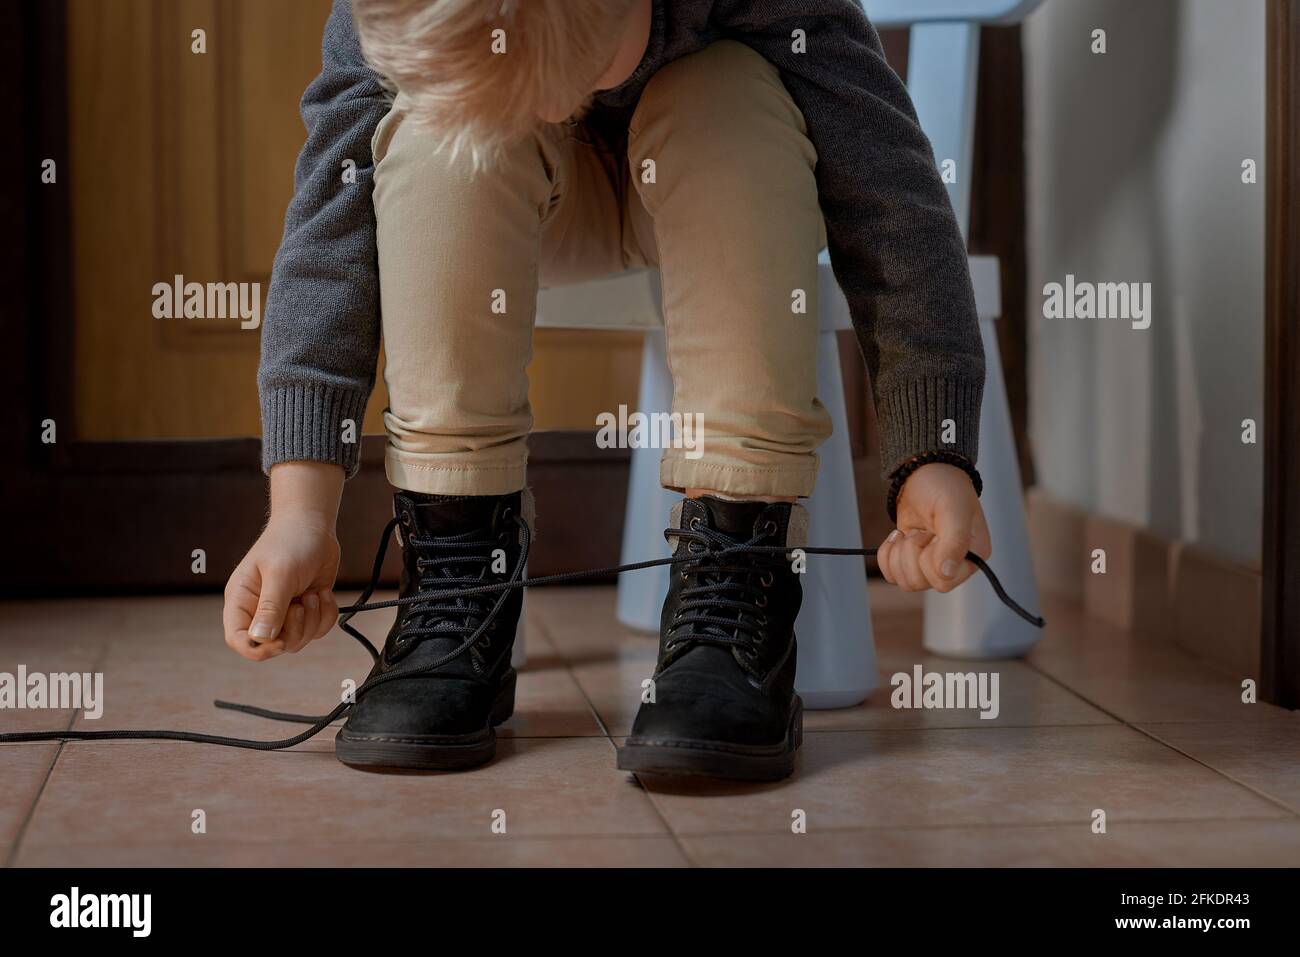 Child tying the laces on boots before leaving home, selective focus Stock Photo